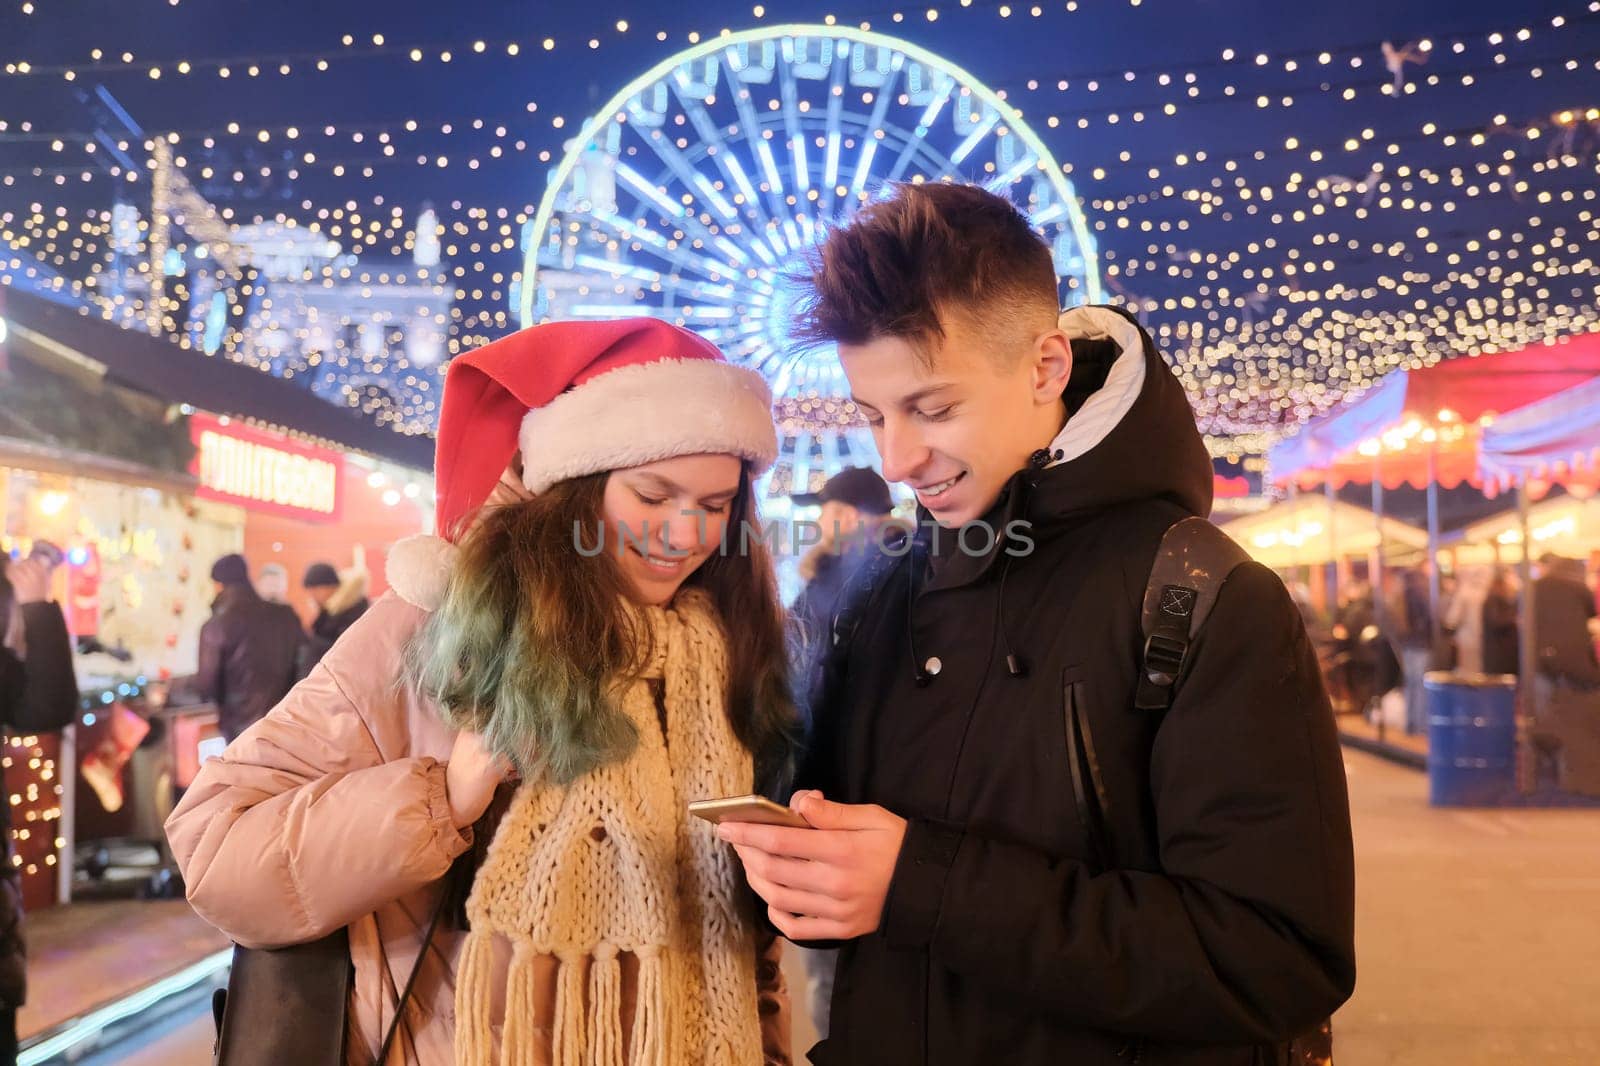 Teenagers boy and girl at the Christmas market, in Santa hat, with a smartphone. Lights, bright garlands of evening city, ferris wheel background